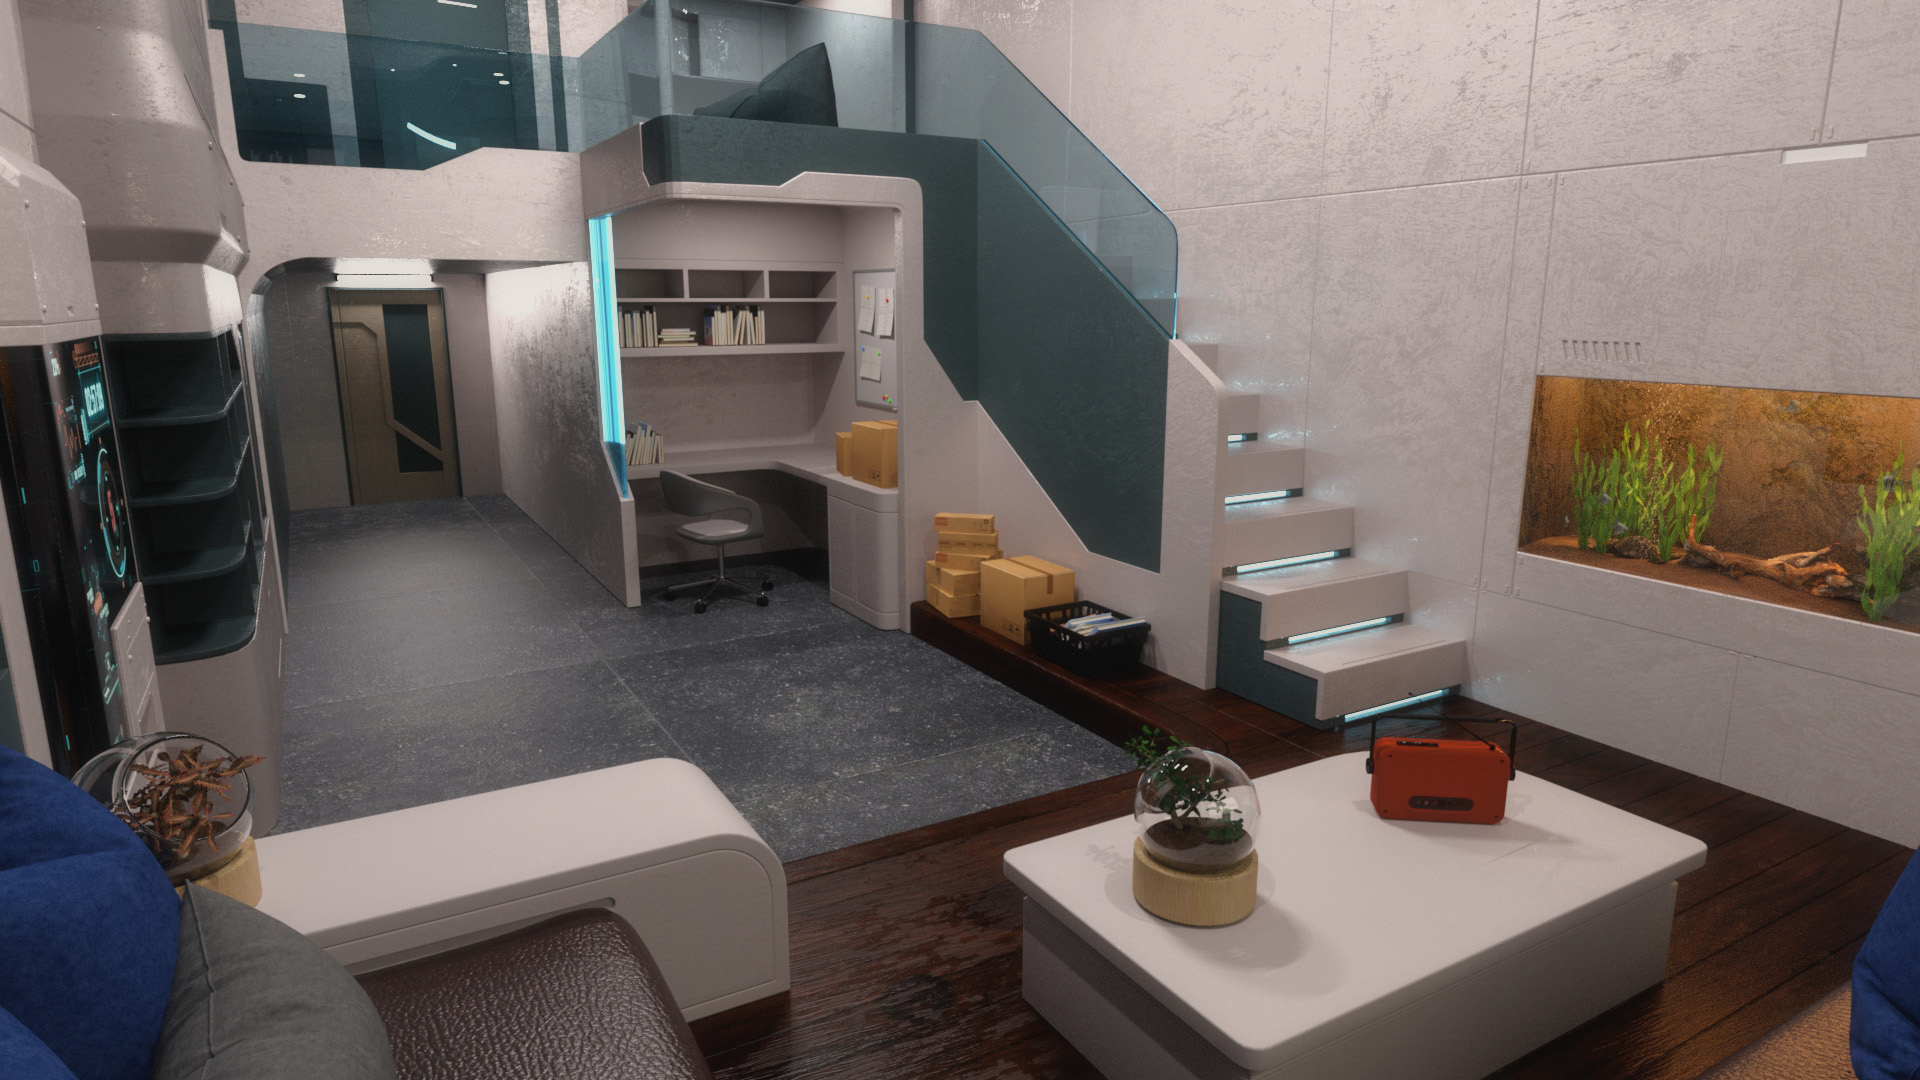 KuJ Sci-Fi Apartment by: Kujira, 3D Models by Daz 3D